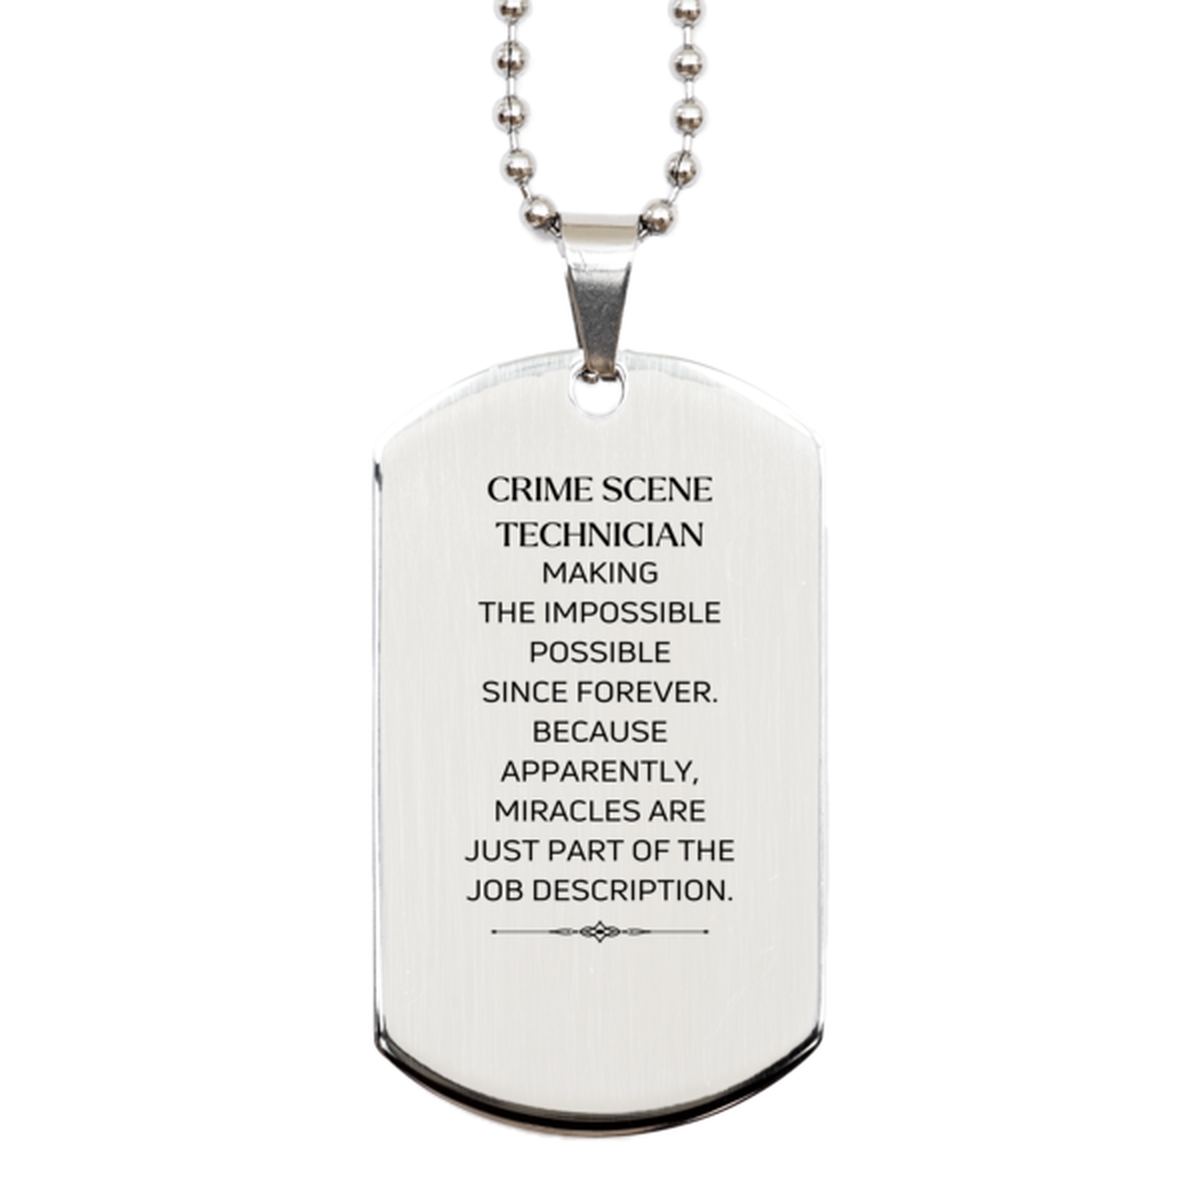 Funny Crime Scene Technician Gifts, Miracles are just part of the job description, Inspirational Birthday Silver Dog Tag For Crime Scene Technician, Men, Women, Coworkers, Friends, Boss